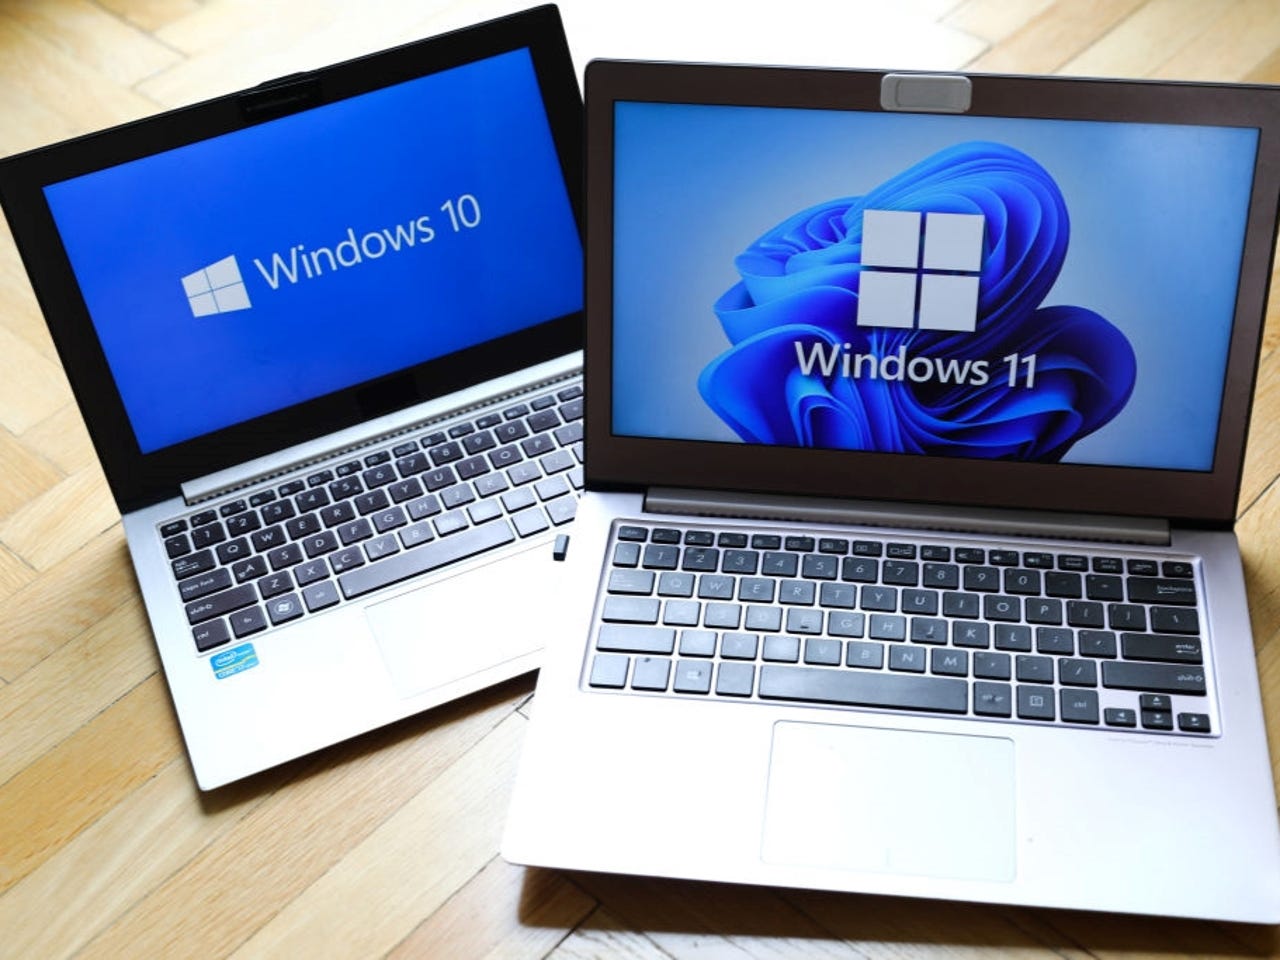 Windows 11 makes it easier than ever to set up a new PC with your